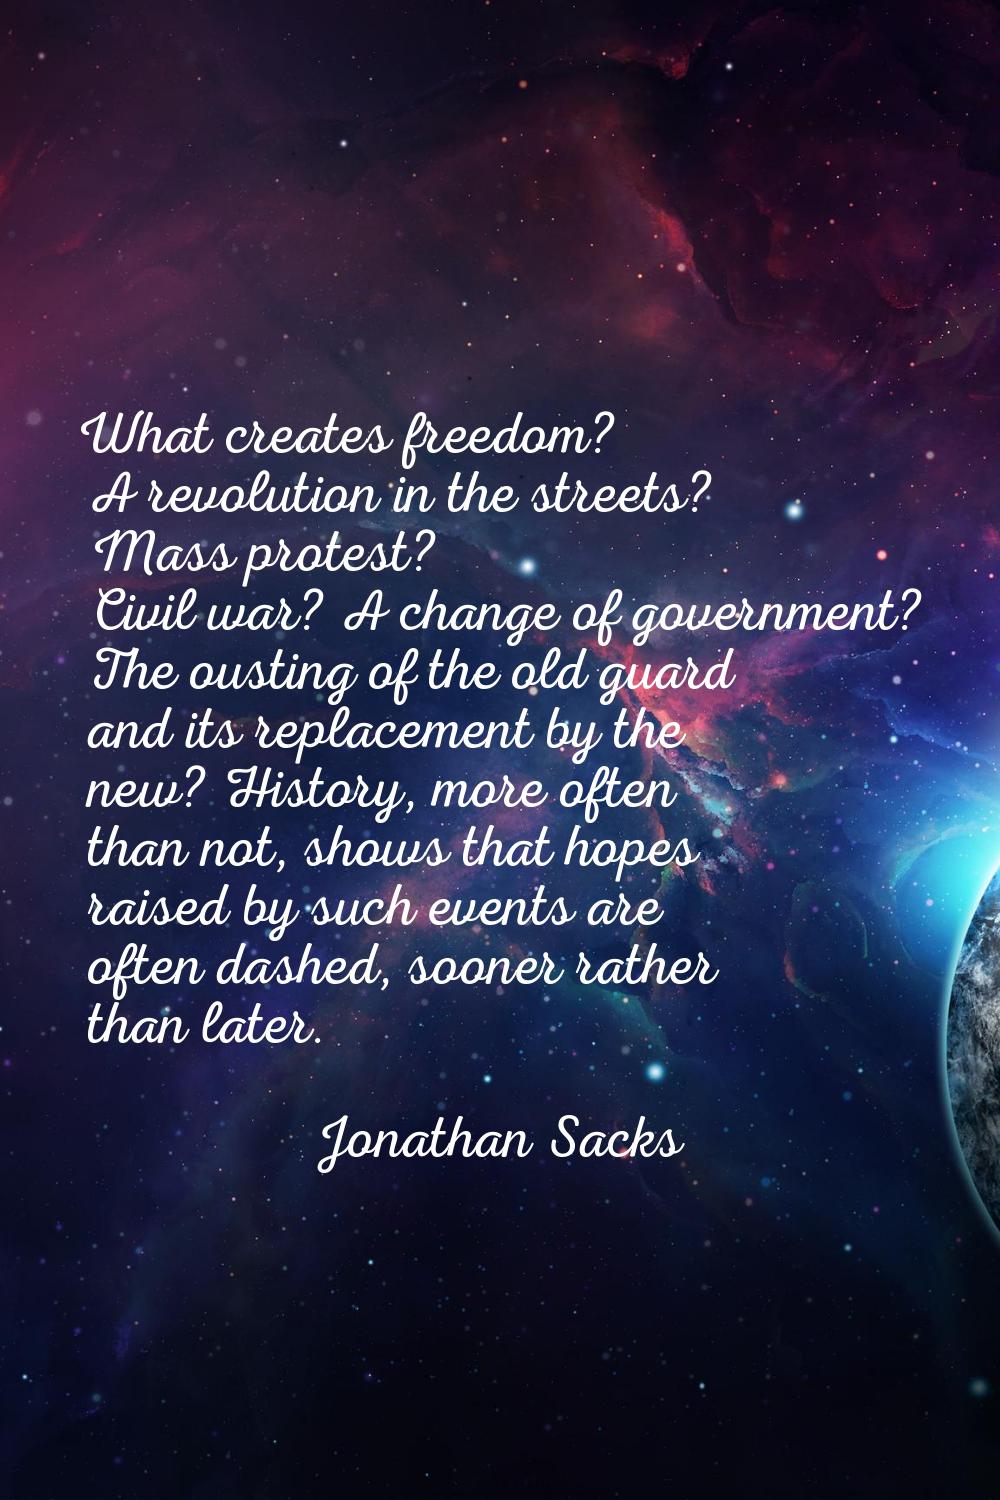 What creates freedom? A revolution in the streets? Mass protest? Civil war? A change of government?